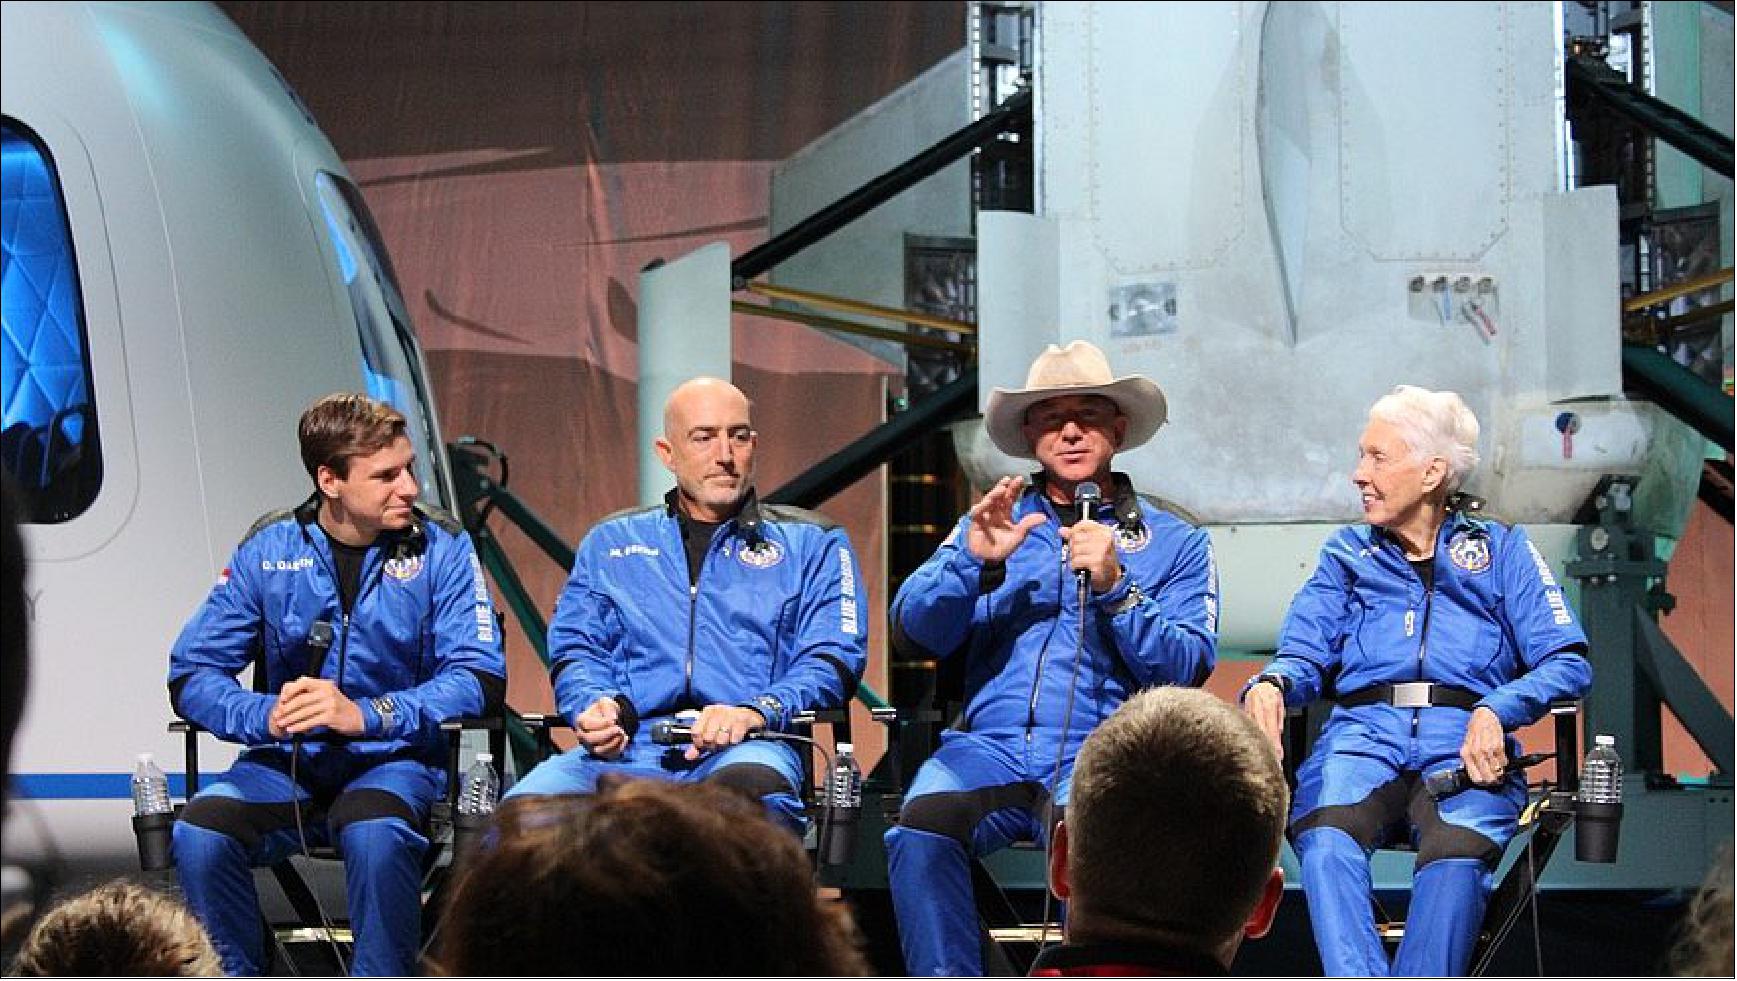 Figure 18: Jeff Bezos (third from left) speaks at a post-flight ceremony with the other people who flew on the NS-16 mission (from left): Oliver Daemen, Mark Bezos and Wally Funk (image credit: SpaceNews/Jeff Foust)